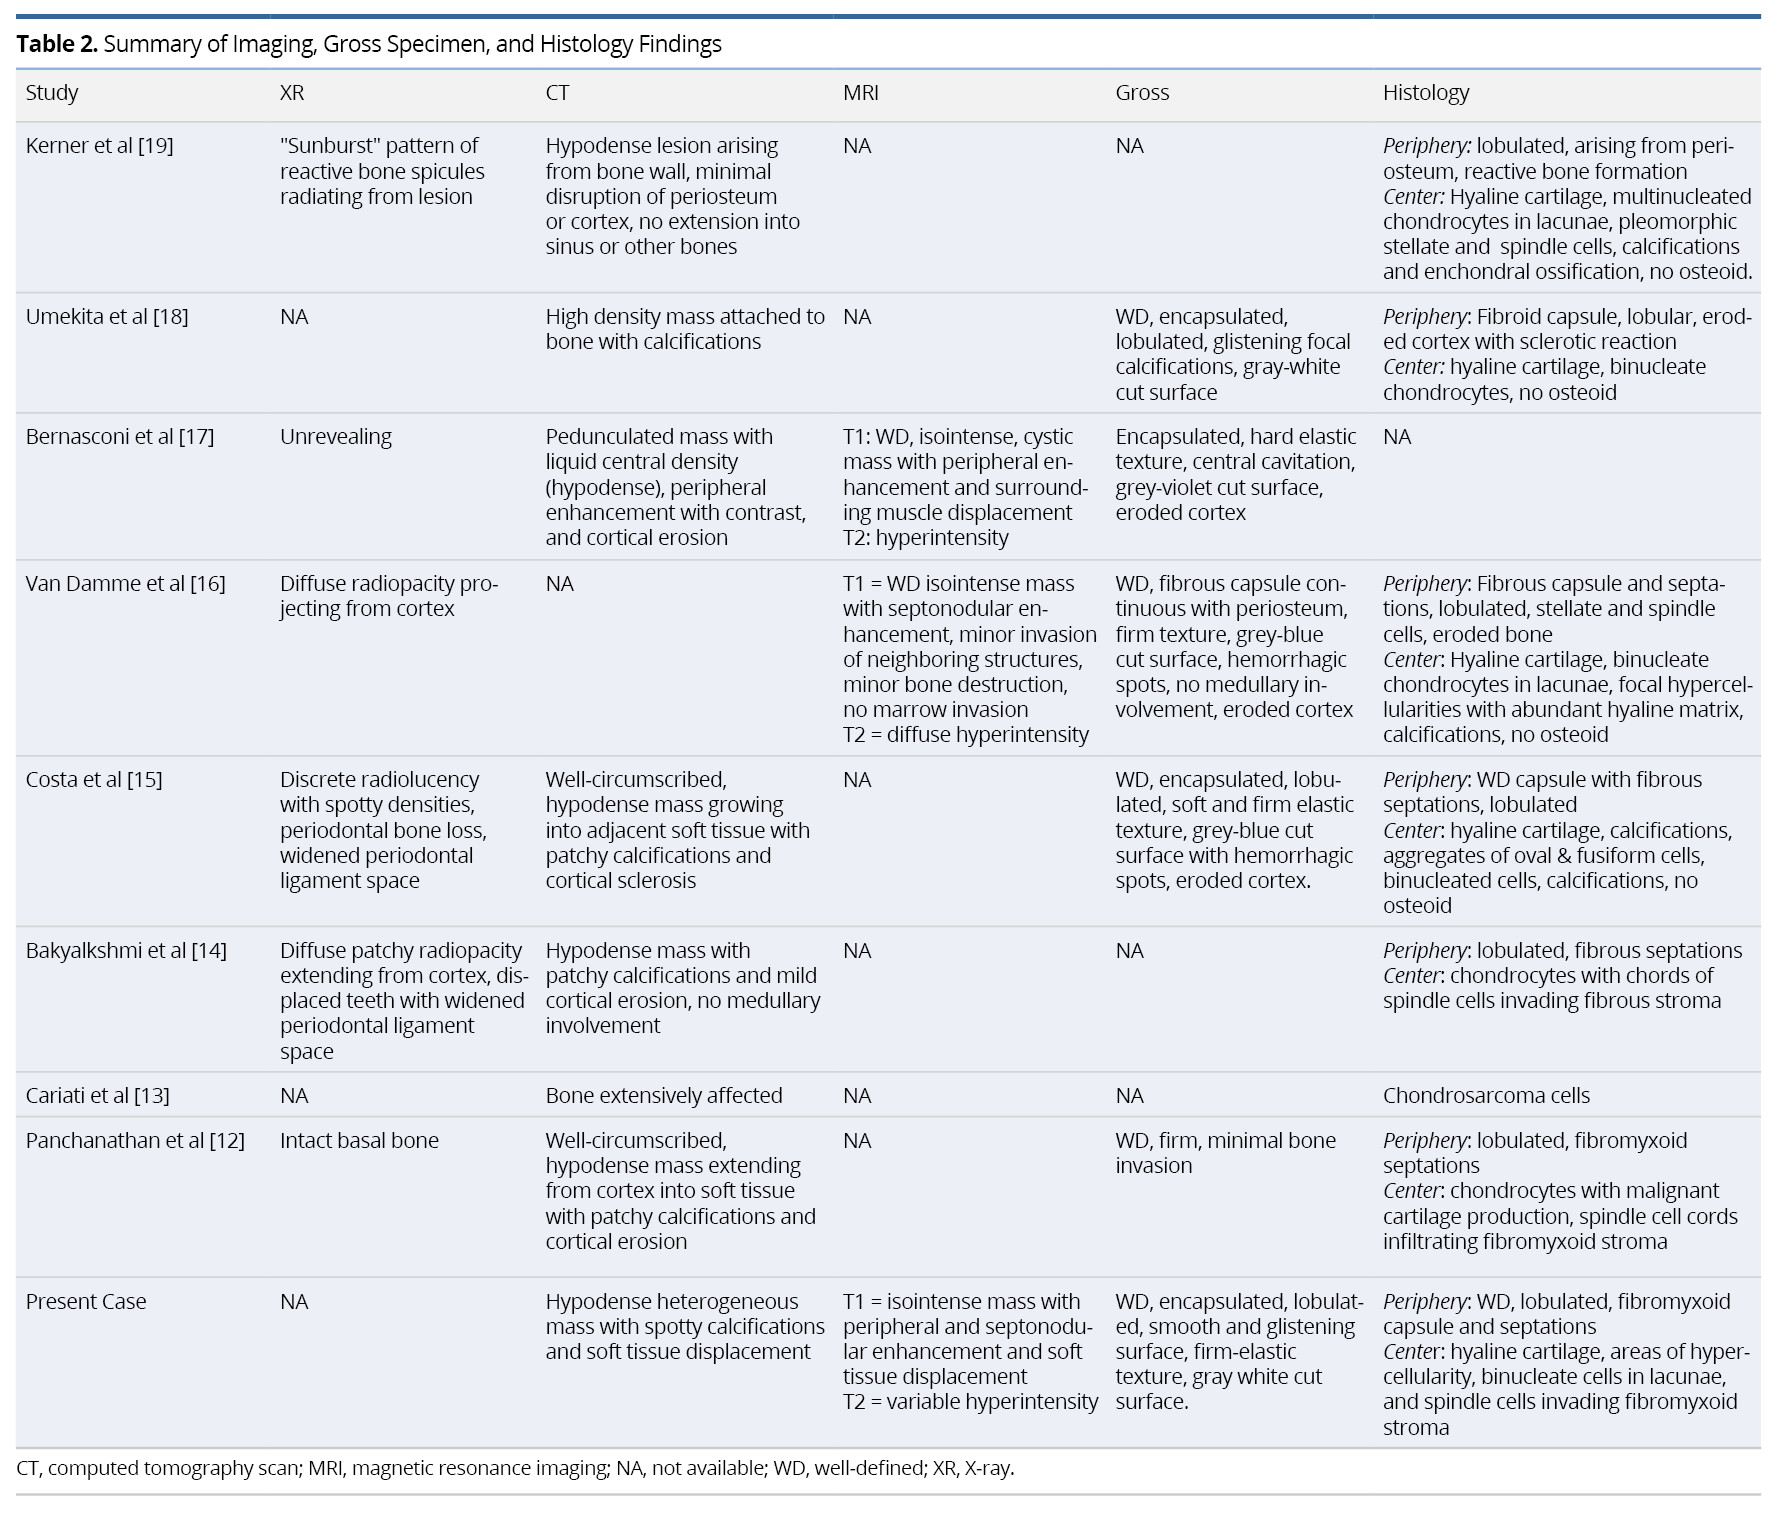 Table 2.jpgSummary of Imaging, Gross Specimen, and Histology Findings